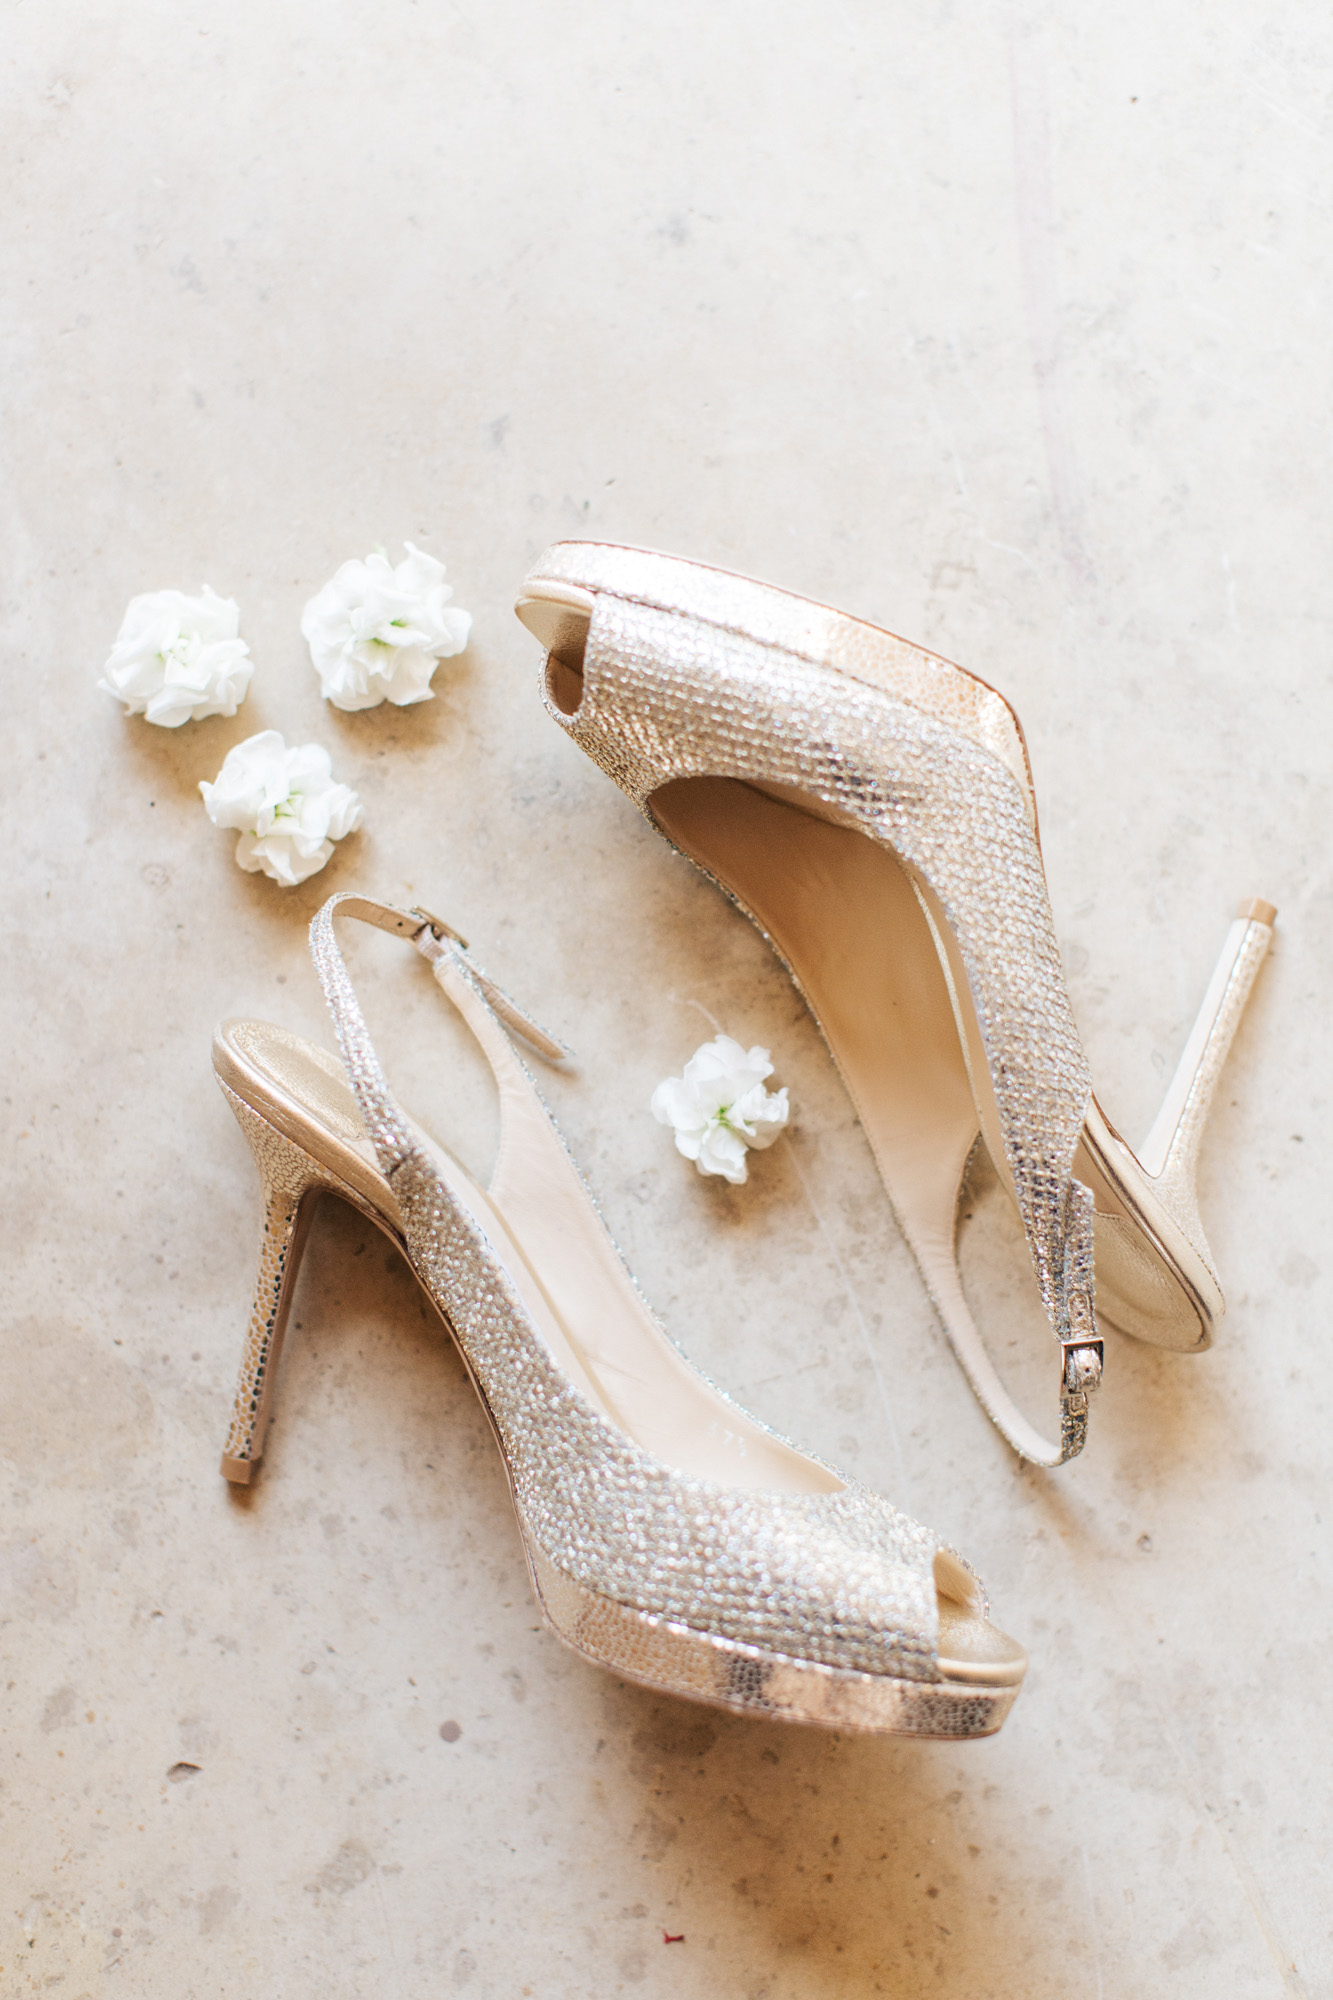 Wedding details in Crete - bridal shoes by Jimmy Choo.